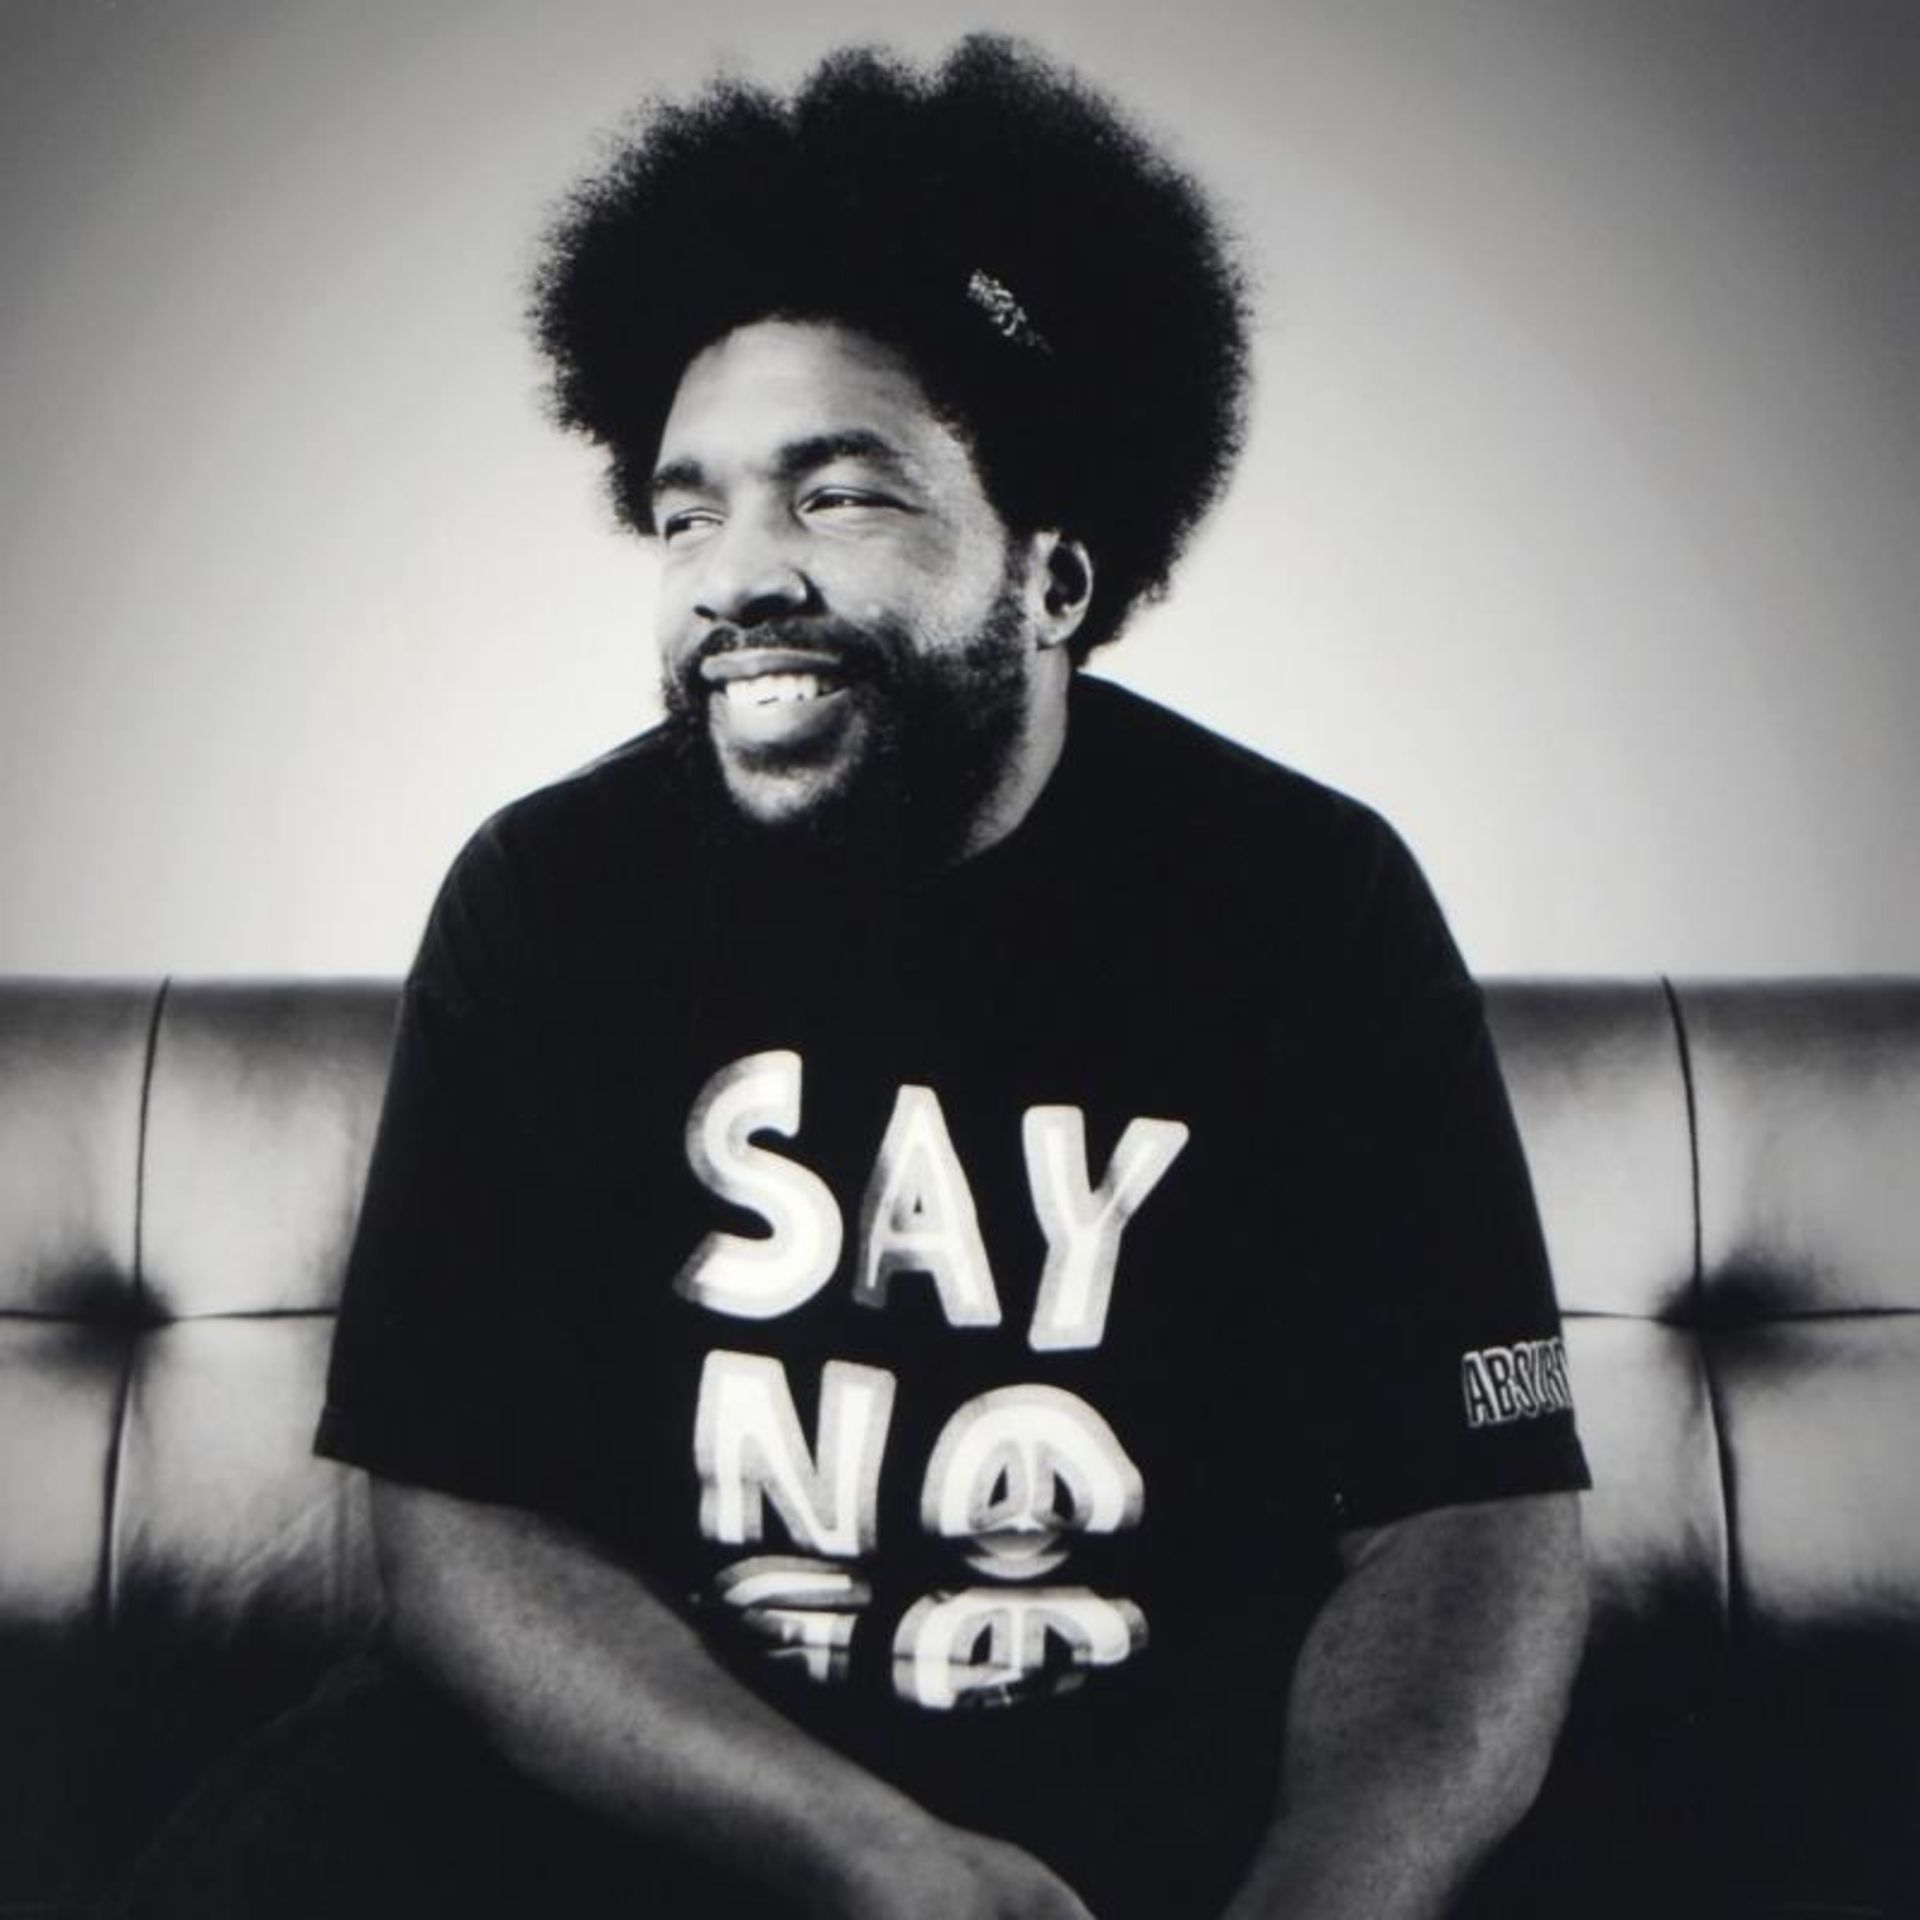 Questlove by Shanahan, Rob - Image 2 of 2